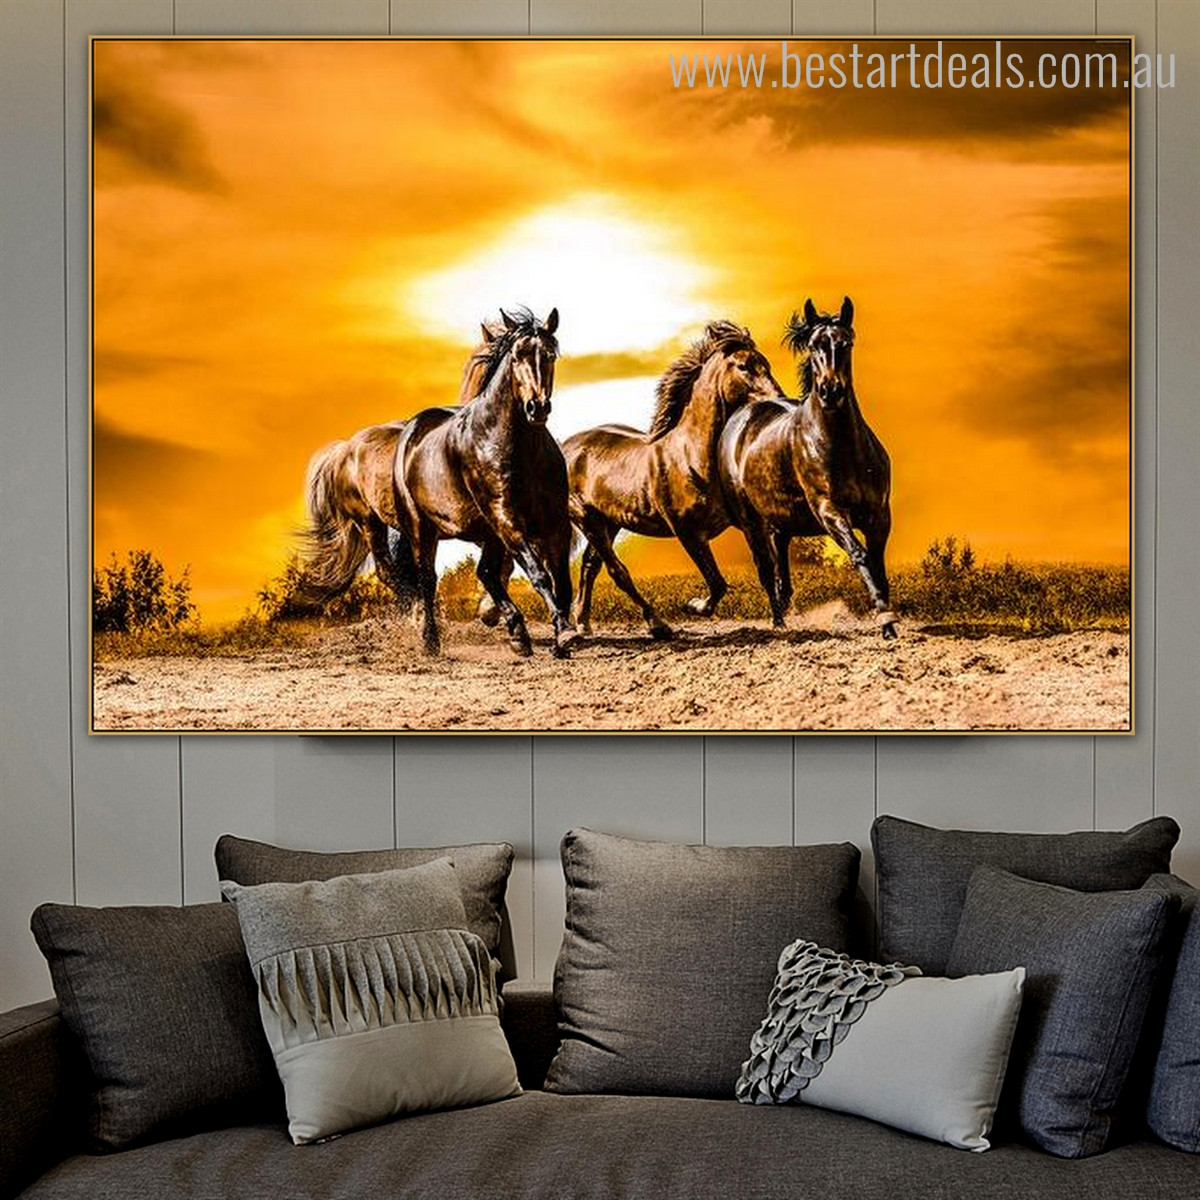 Three Horses Animal Framed Contemporary Painting Image Canvas Print for Room Wall Adornment